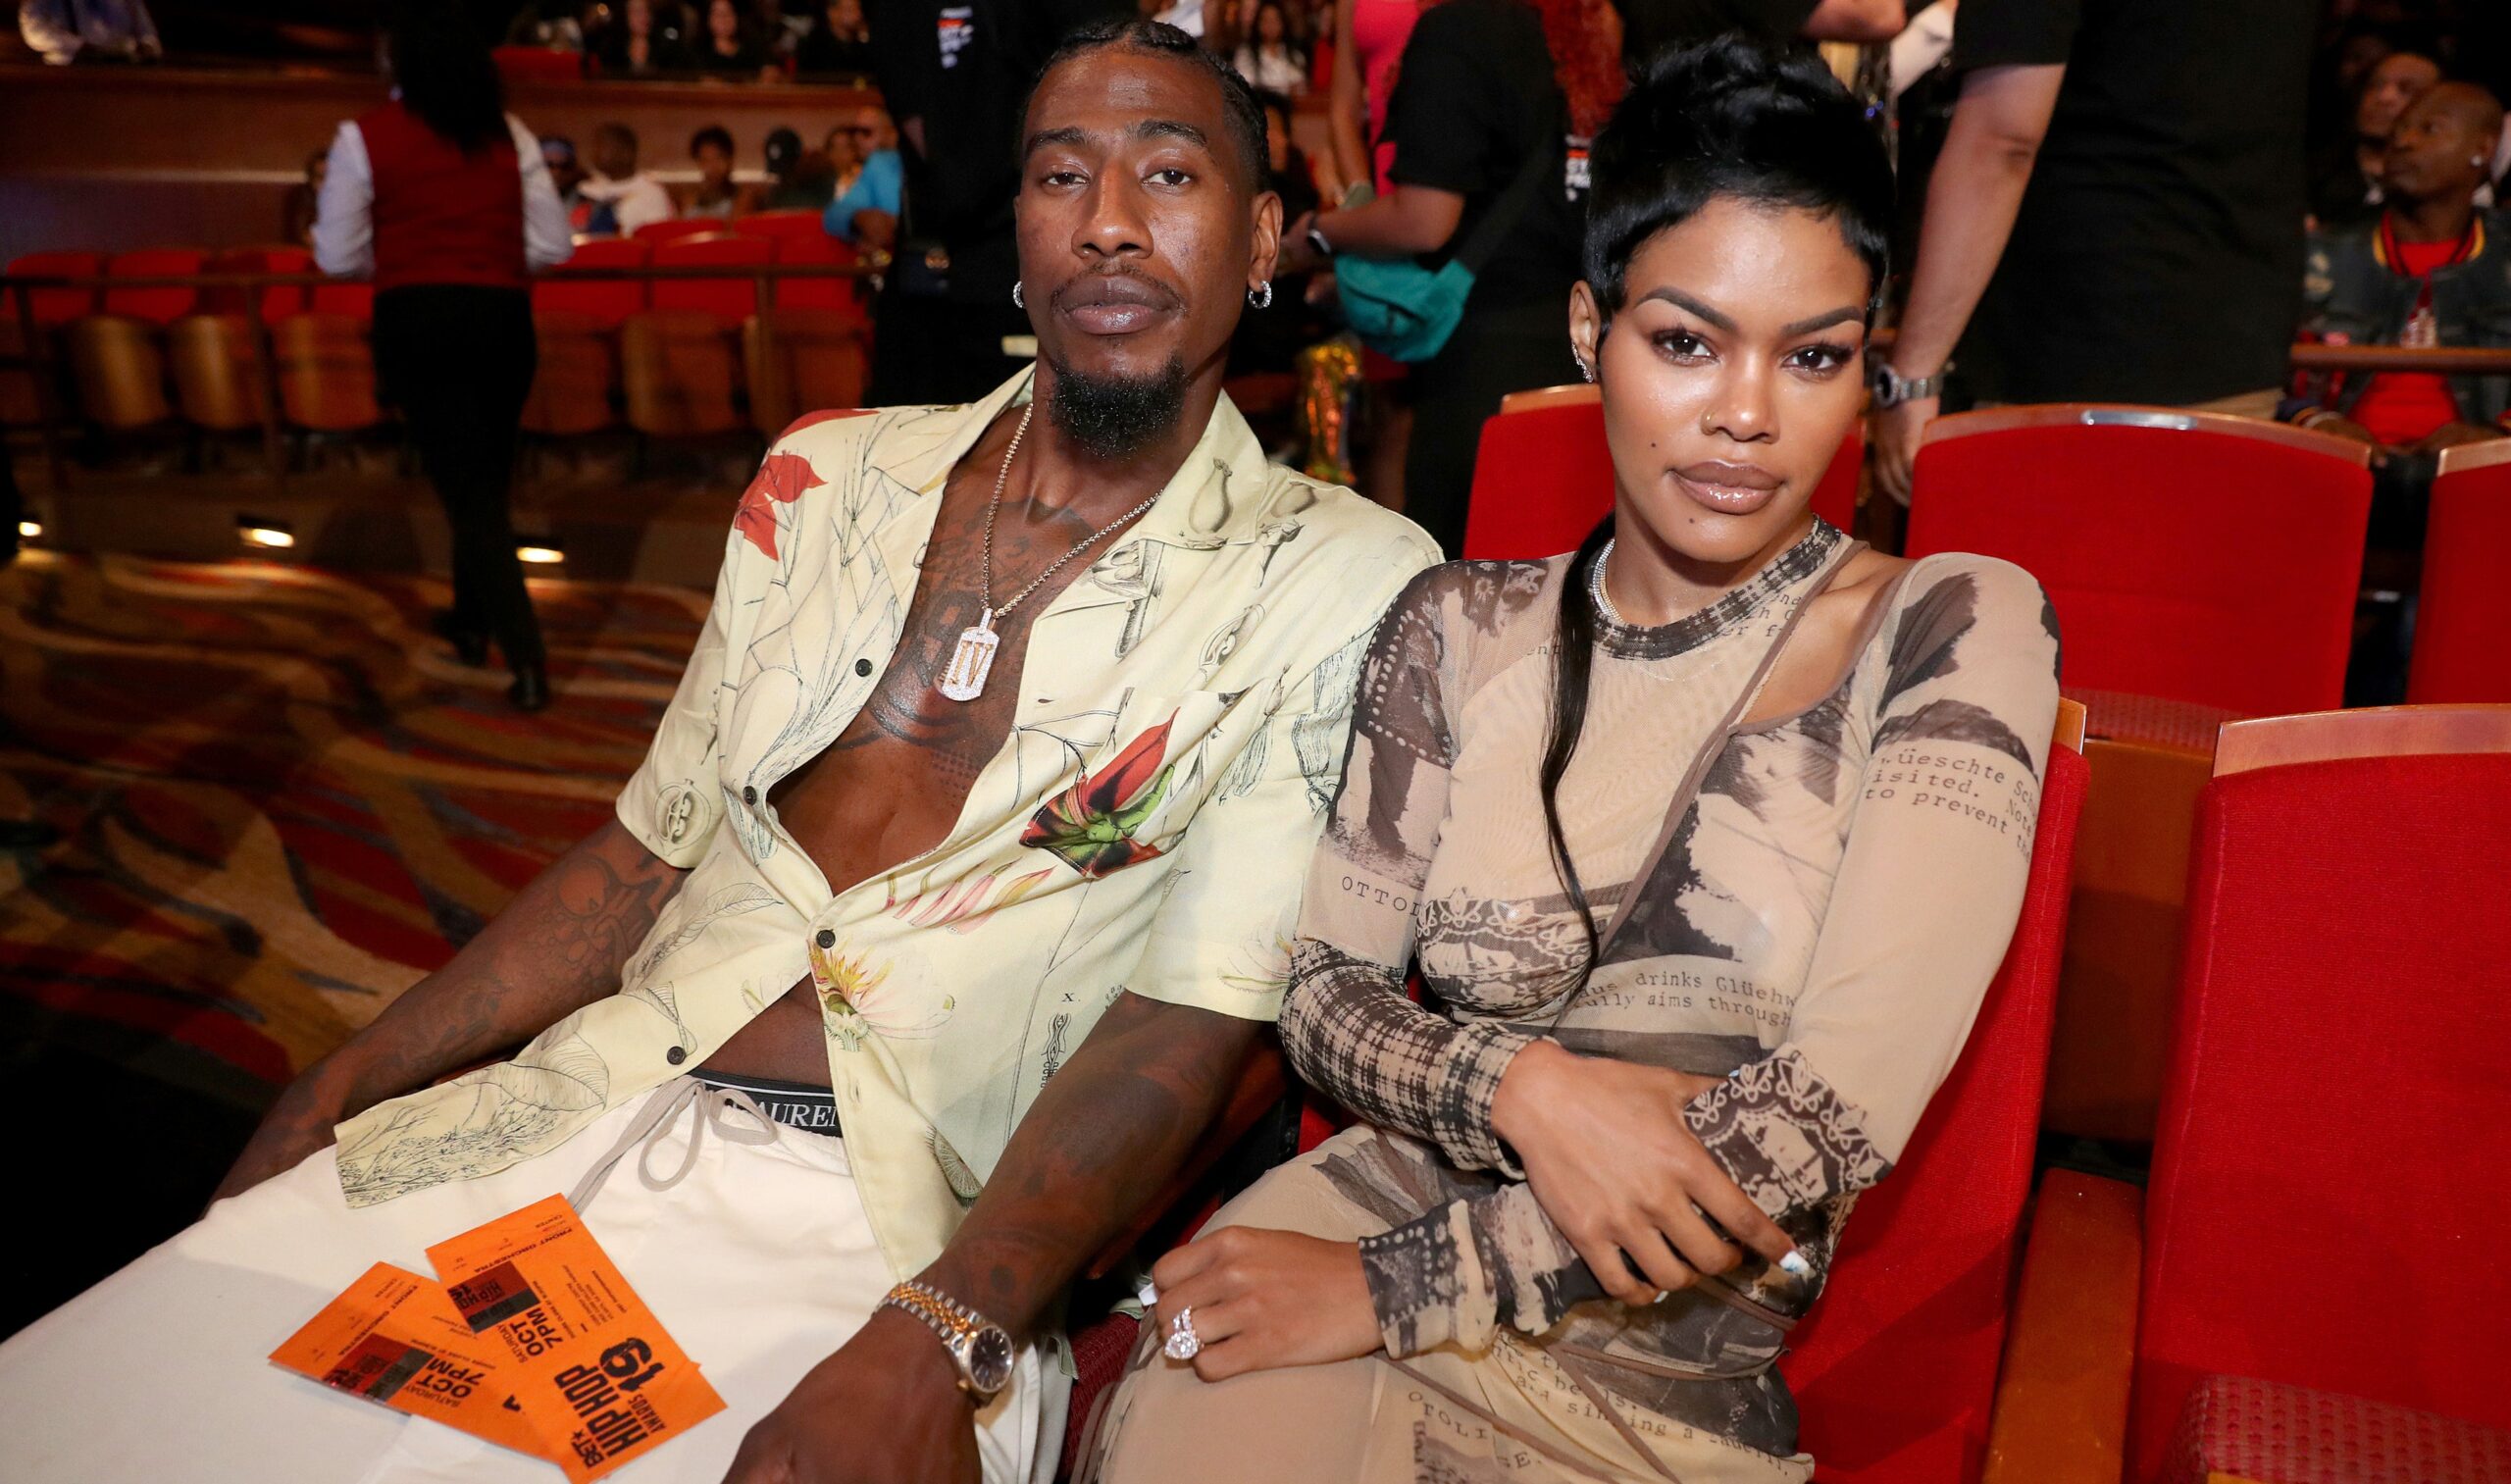 Teyana Taylor Wants You to Know She Turned Her Utilities Back on After Iman Shumpert Turned Them Off, Calls Out Clickbait Headlines [Court Documents]